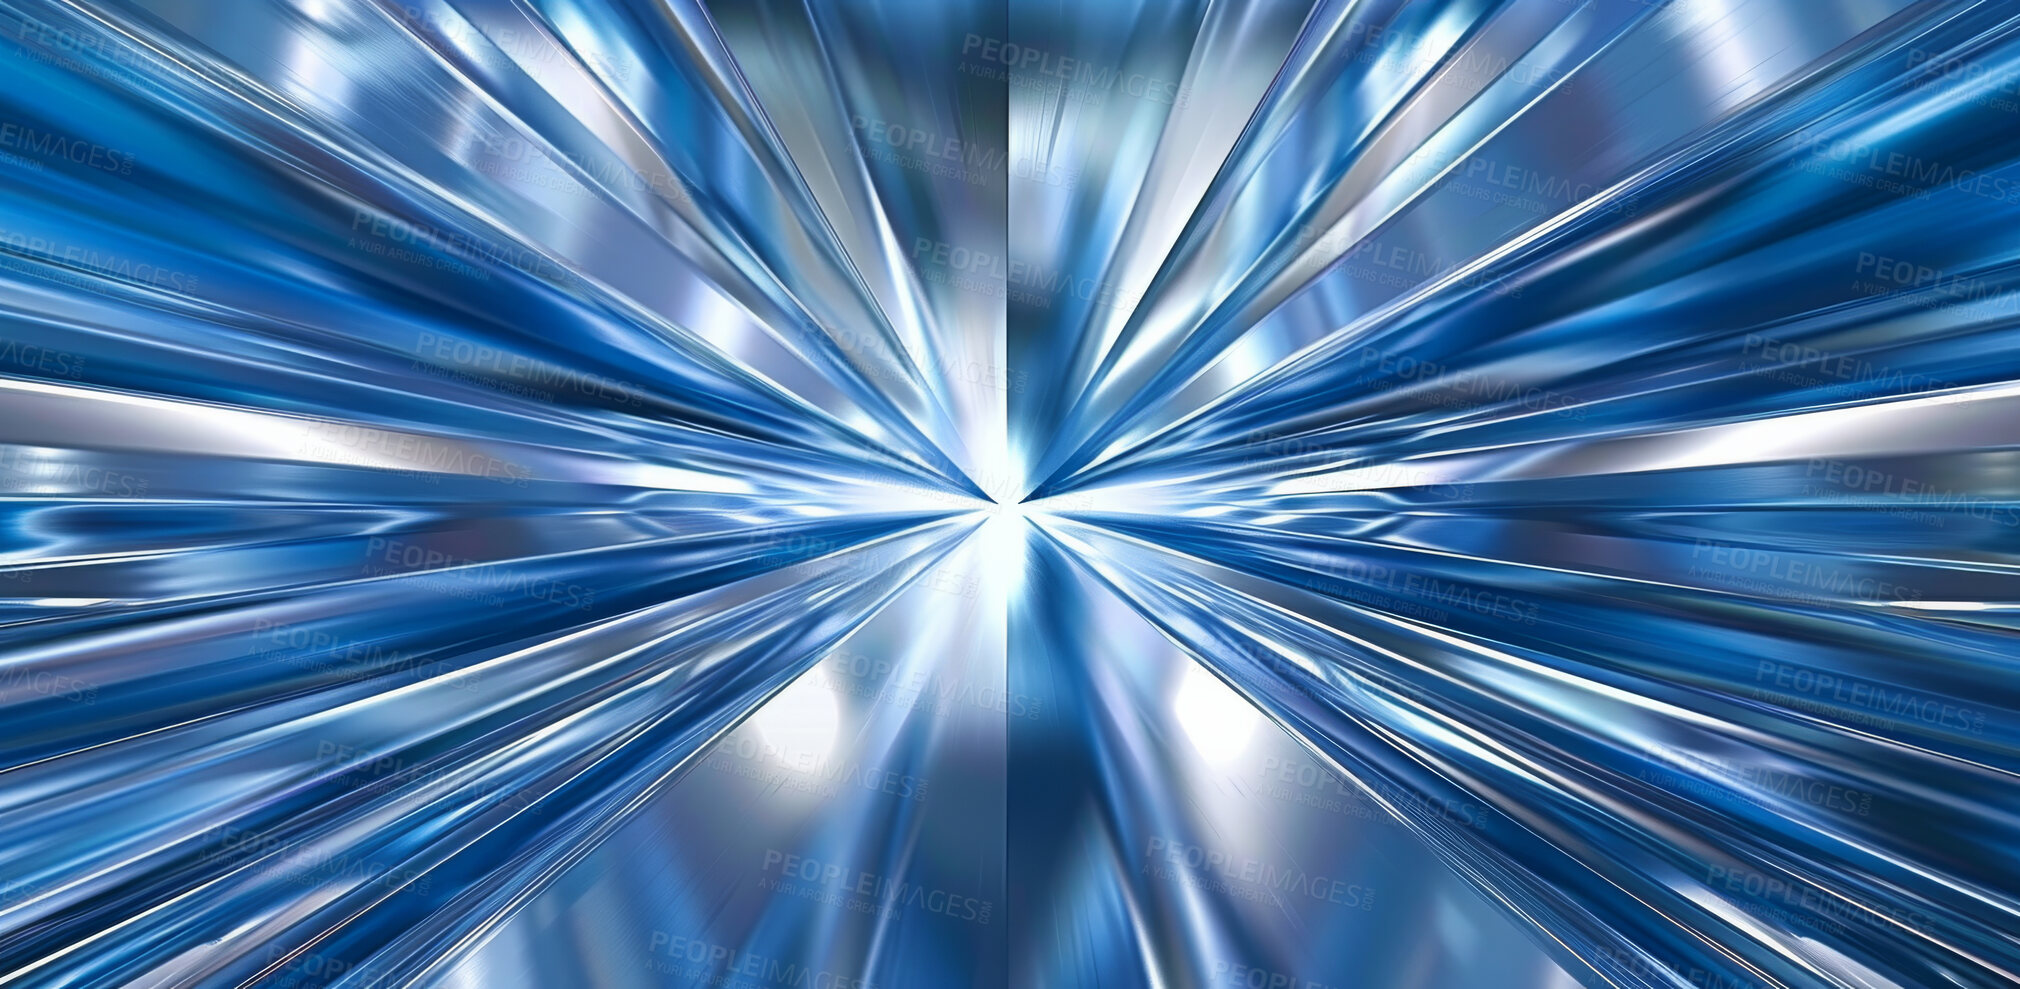 Buy stock photo 3d, prism or glass as futuristic, art or abstract of digital, galaxy or star explosion as wallpaper. Flare, light or mirror to burst as graphic, energy or vector of science fiction, virtual or space